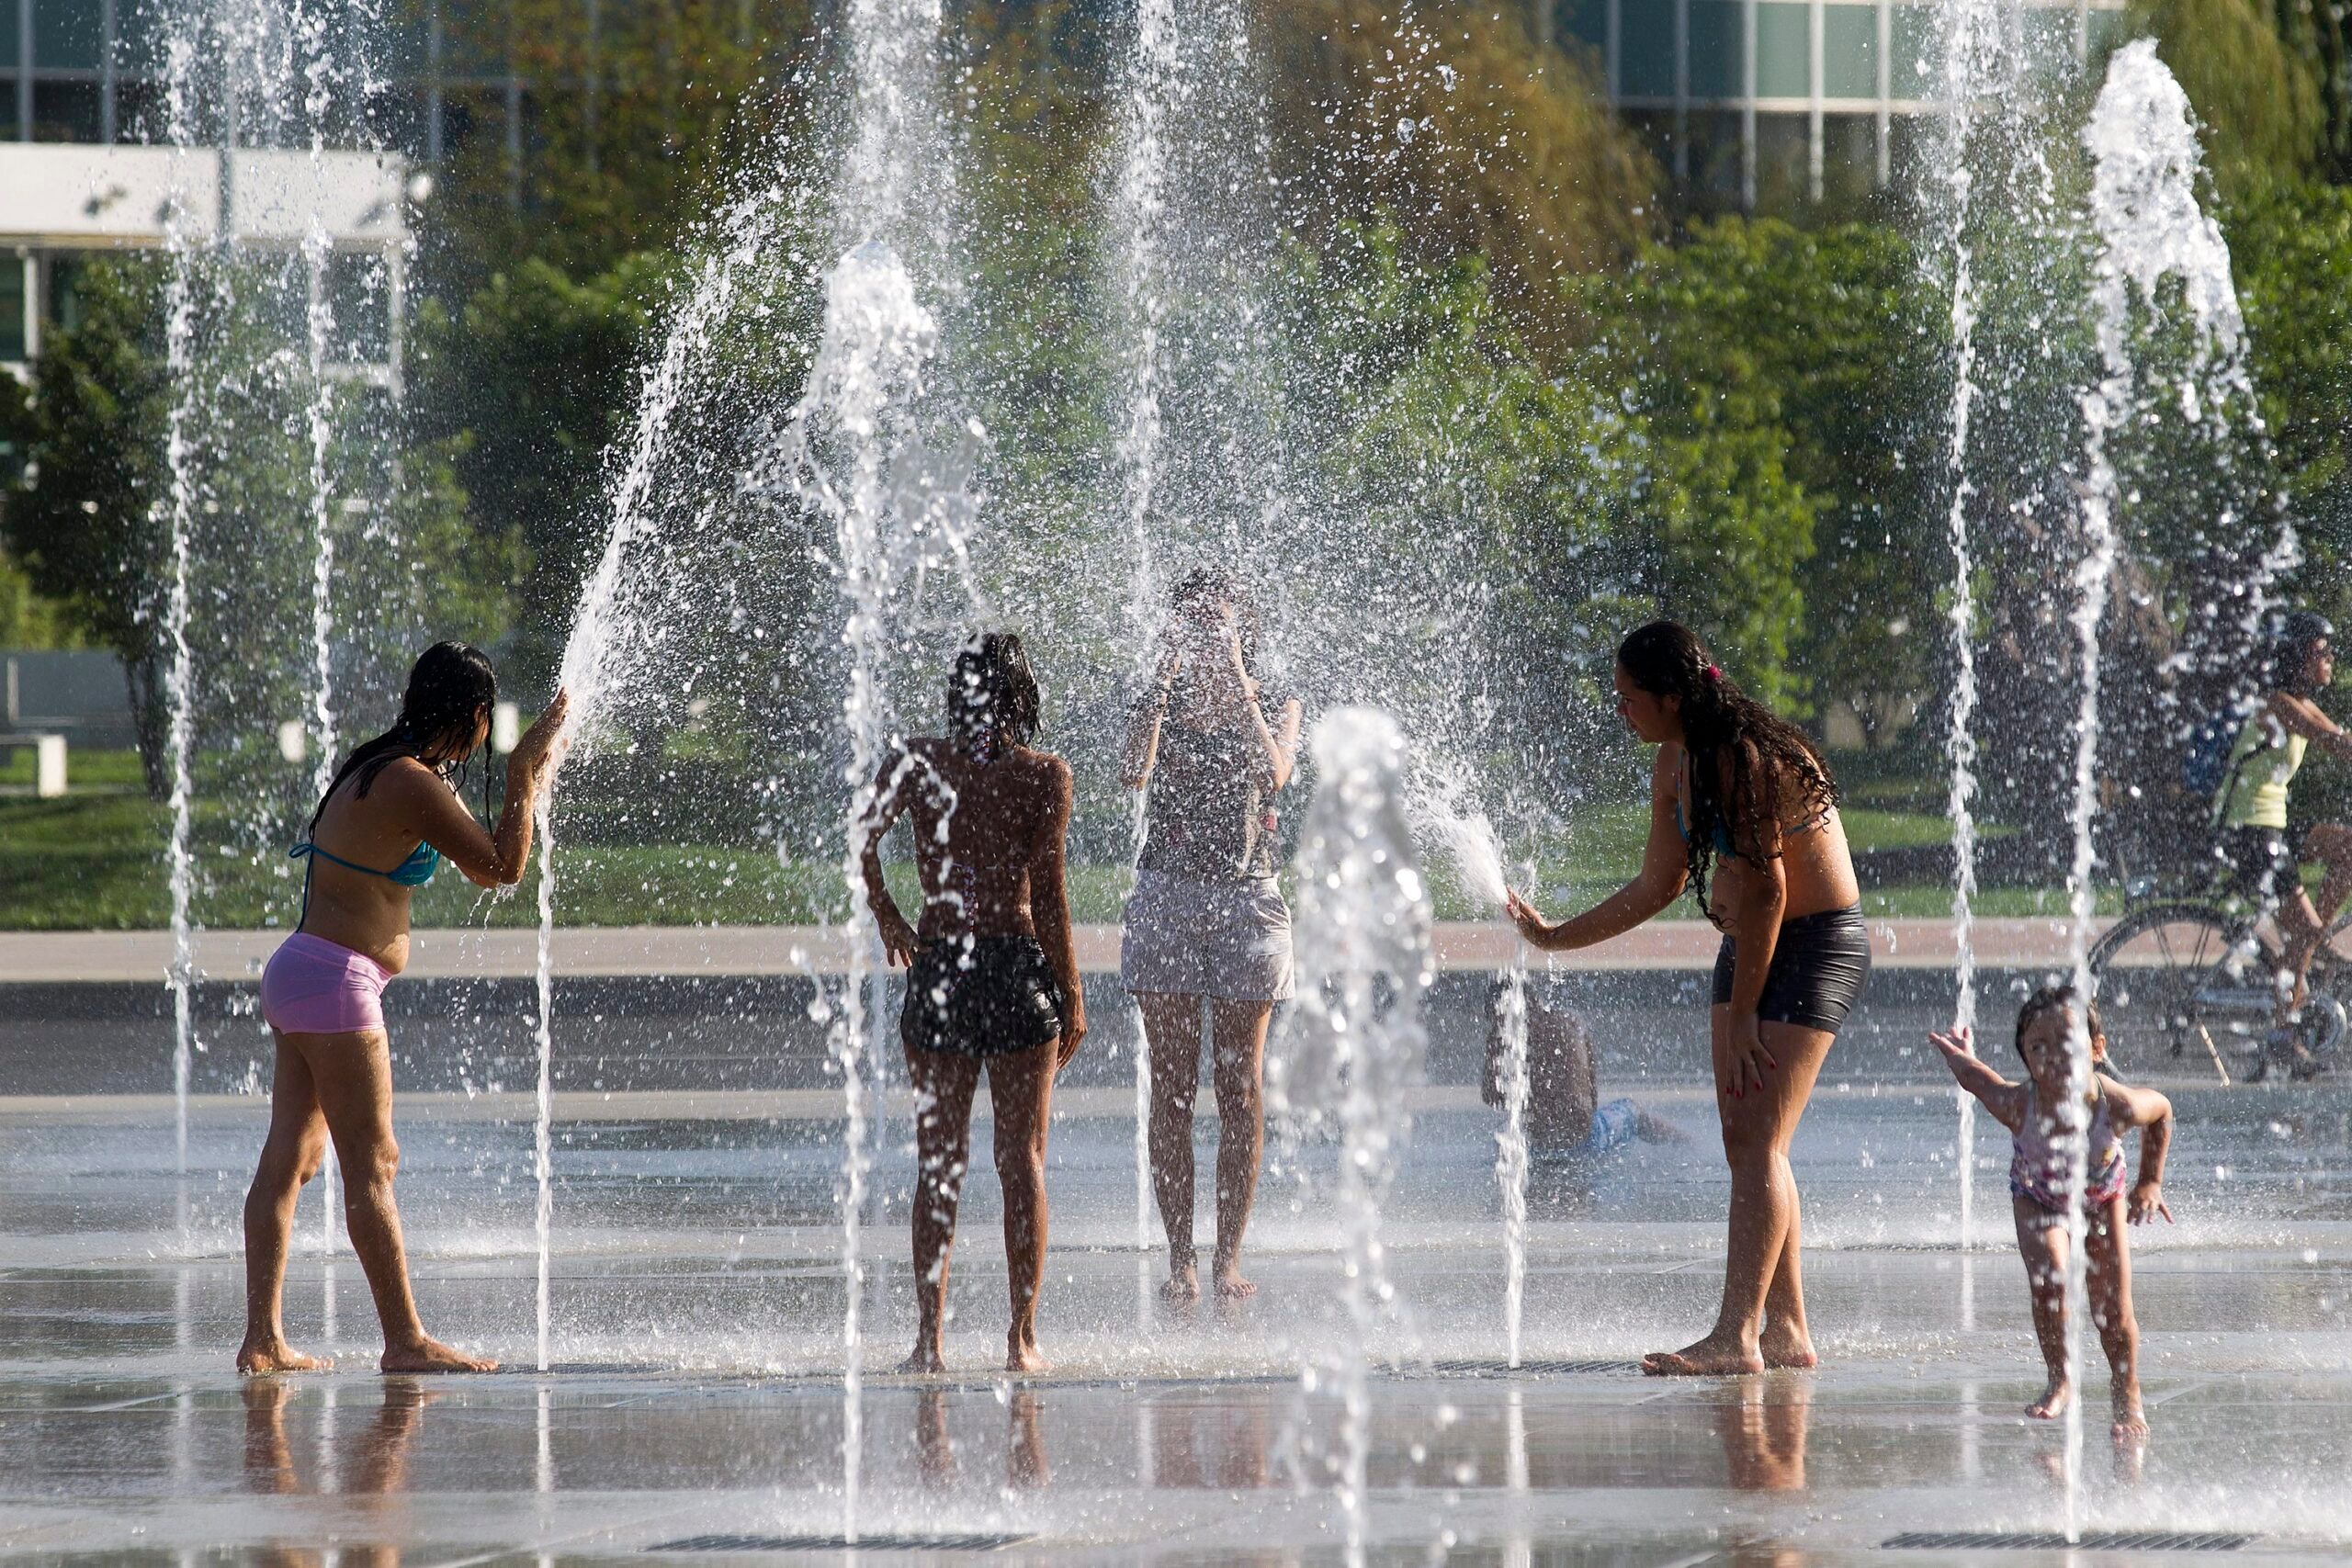 Countries must deal with health risks of heatwaves – UN